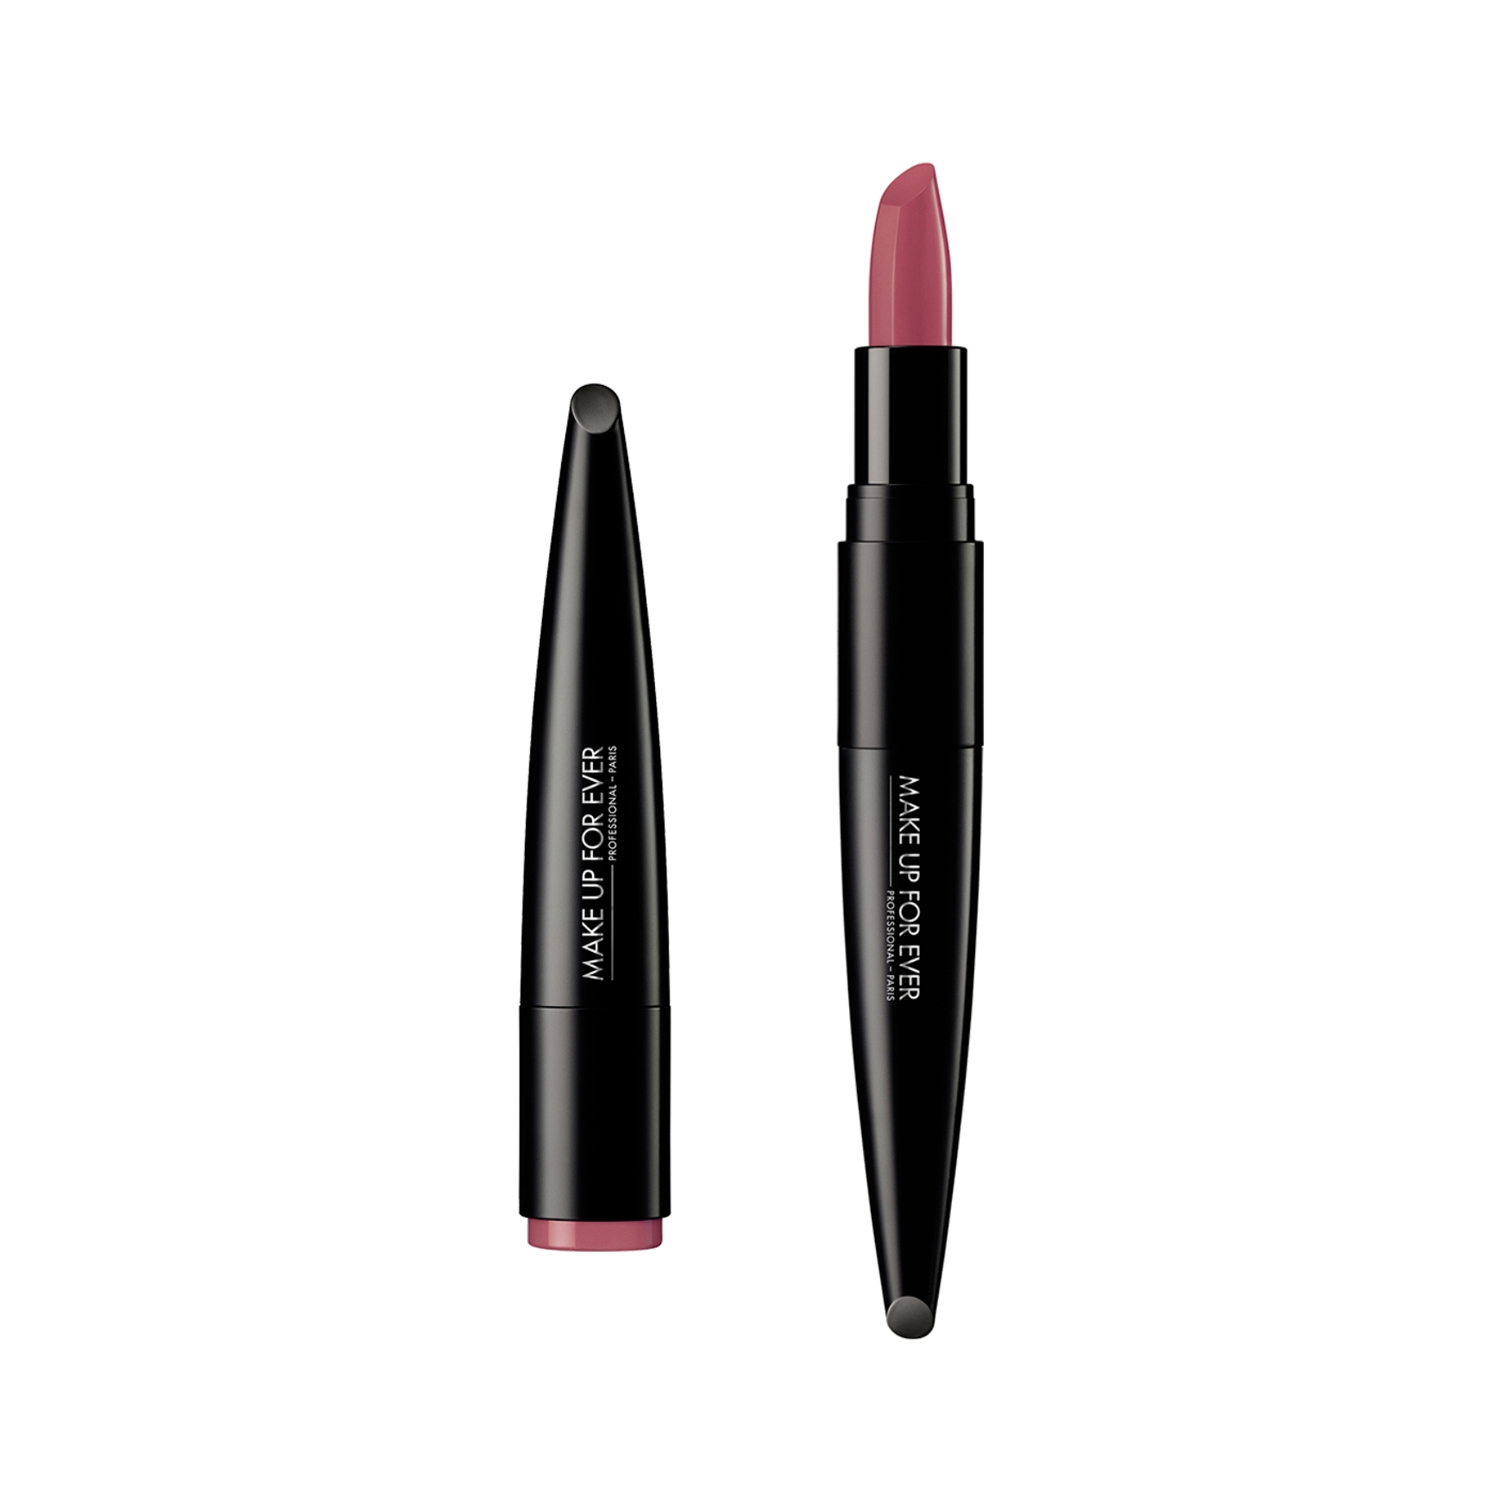 Make Up For Ever | Make Up For Ever Rouge Artist-intense Color Beautifying Lipstick - Poised Rosewood 166 (3.2g)